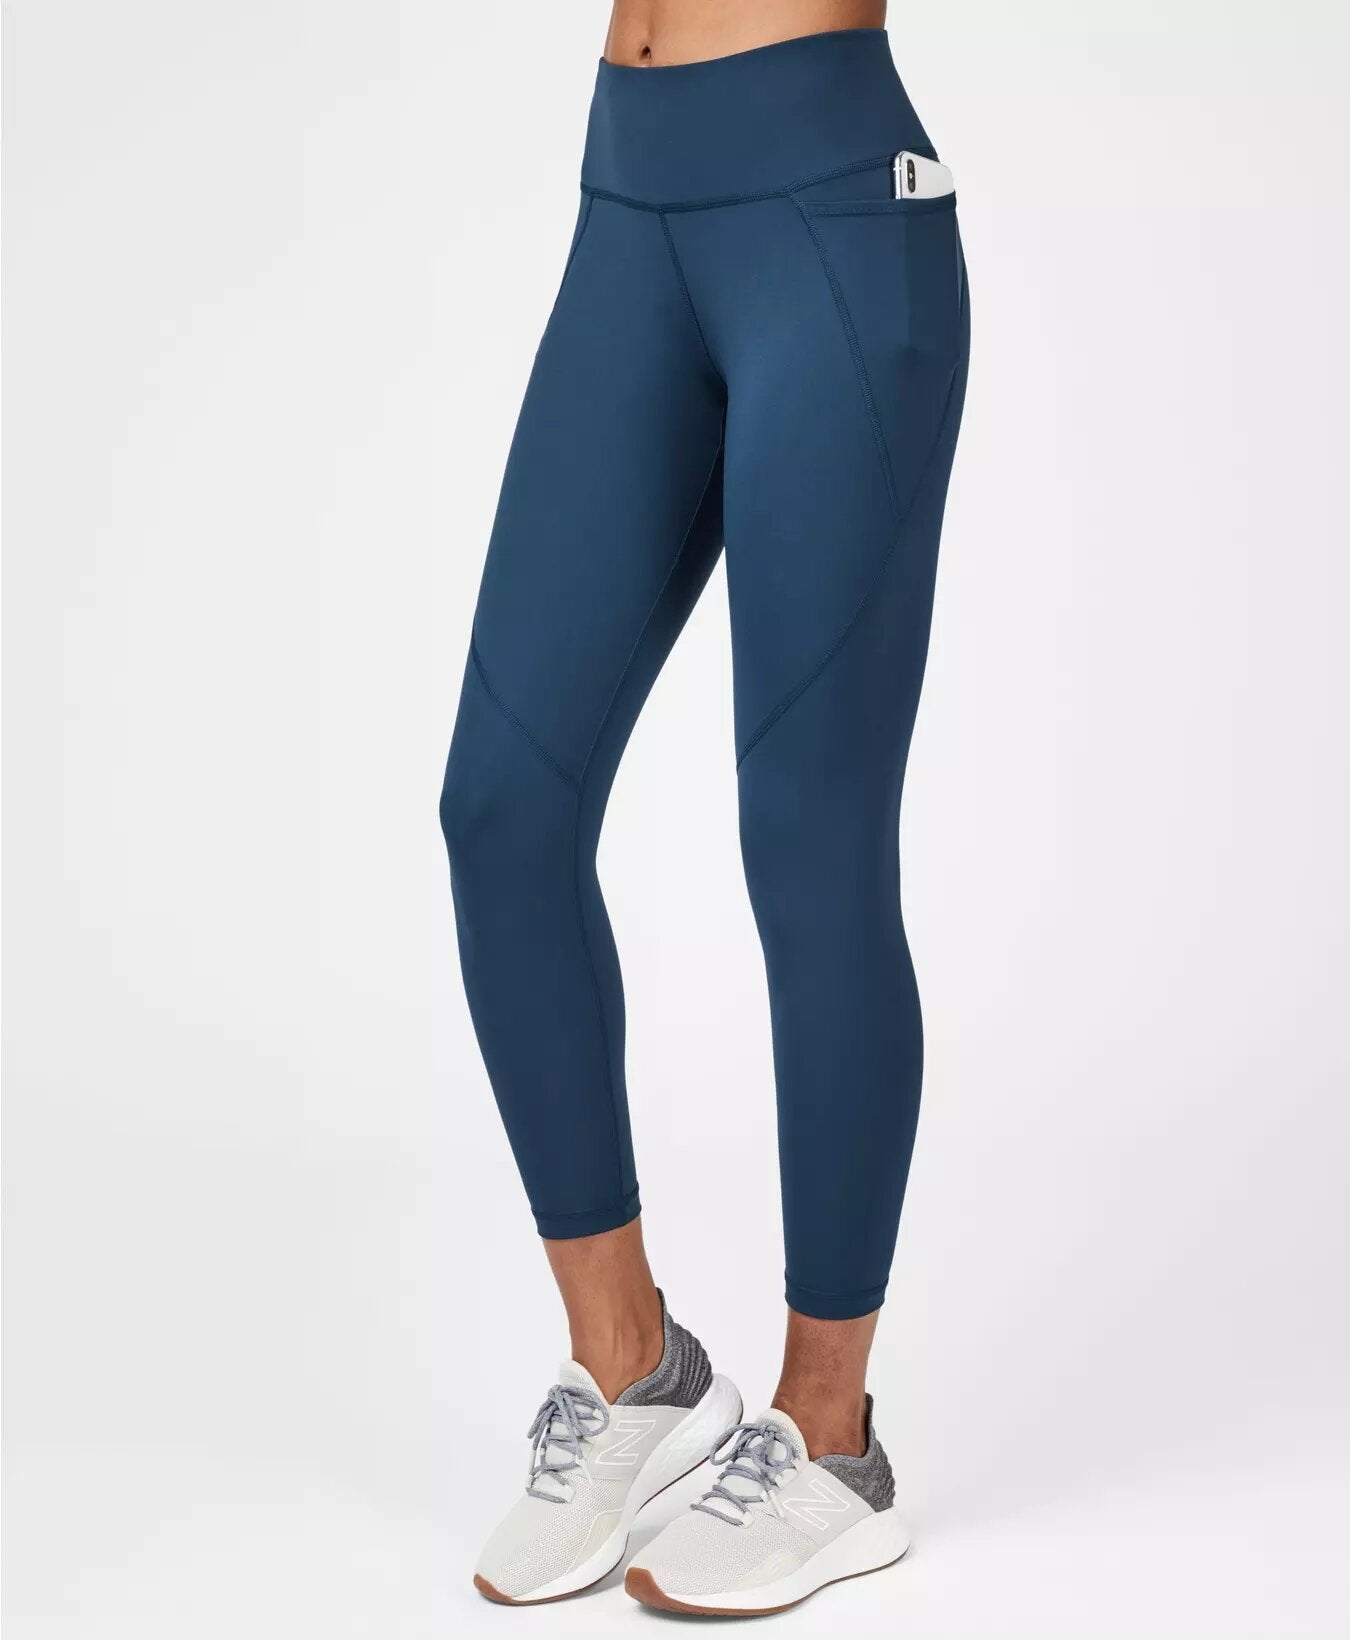 Extra High-Waisted PowerSoft Leggings for Women | Old Navy | Fitness  leggings women, High waisted leggings, Women's leggings